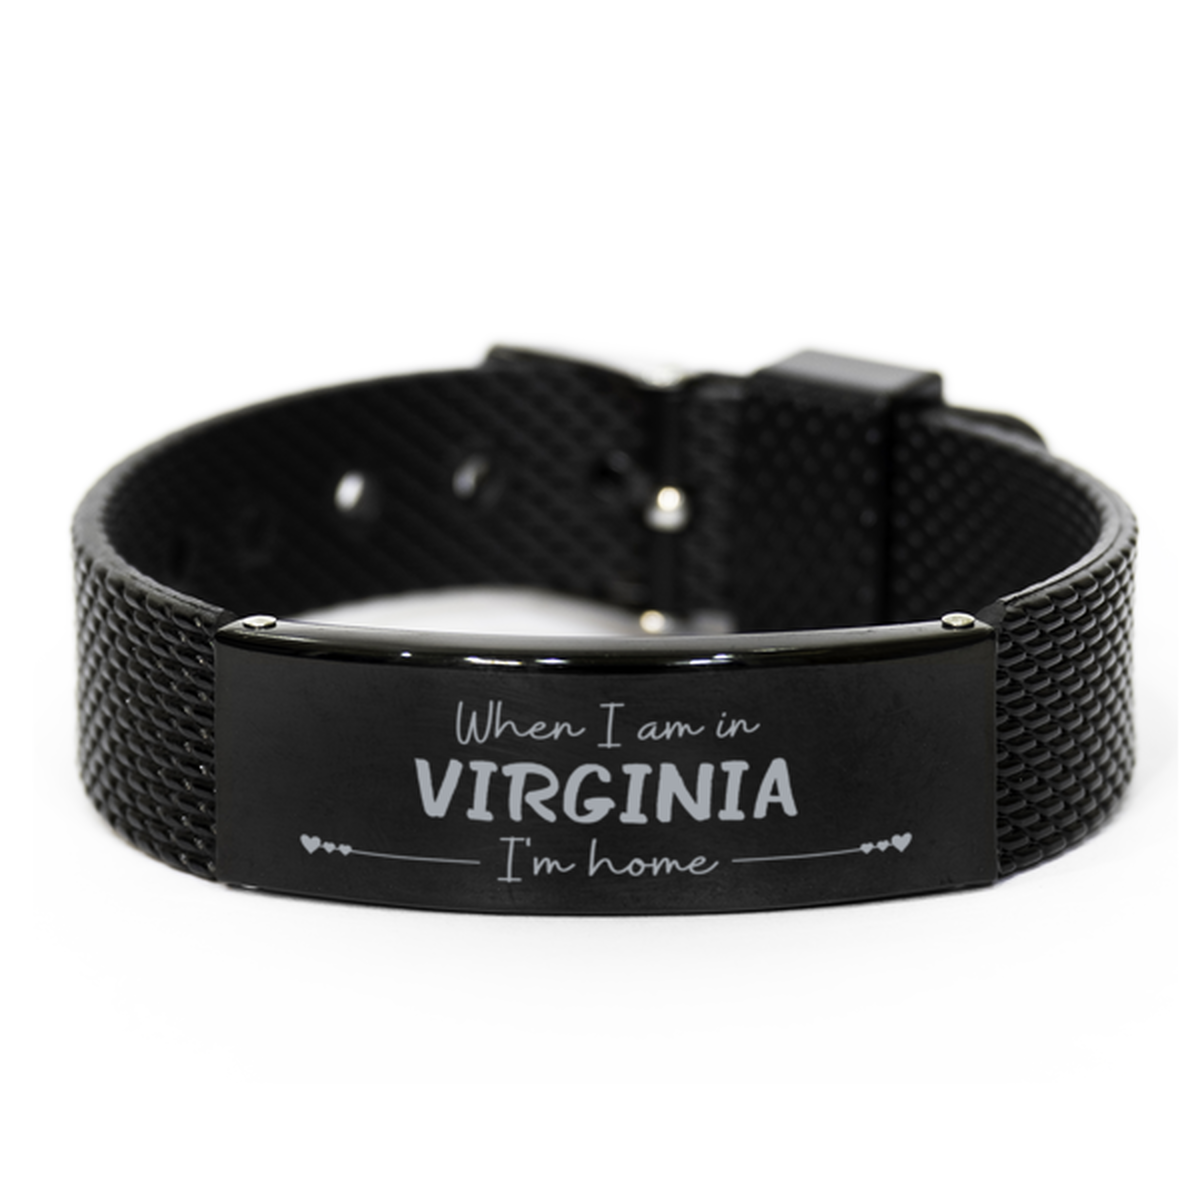 When I am in Virginia I'm home Black Shark Mesh Bracelet, Cheap Gifts For Virginia, State Virginia Birthday Gifts for Friends Coworker